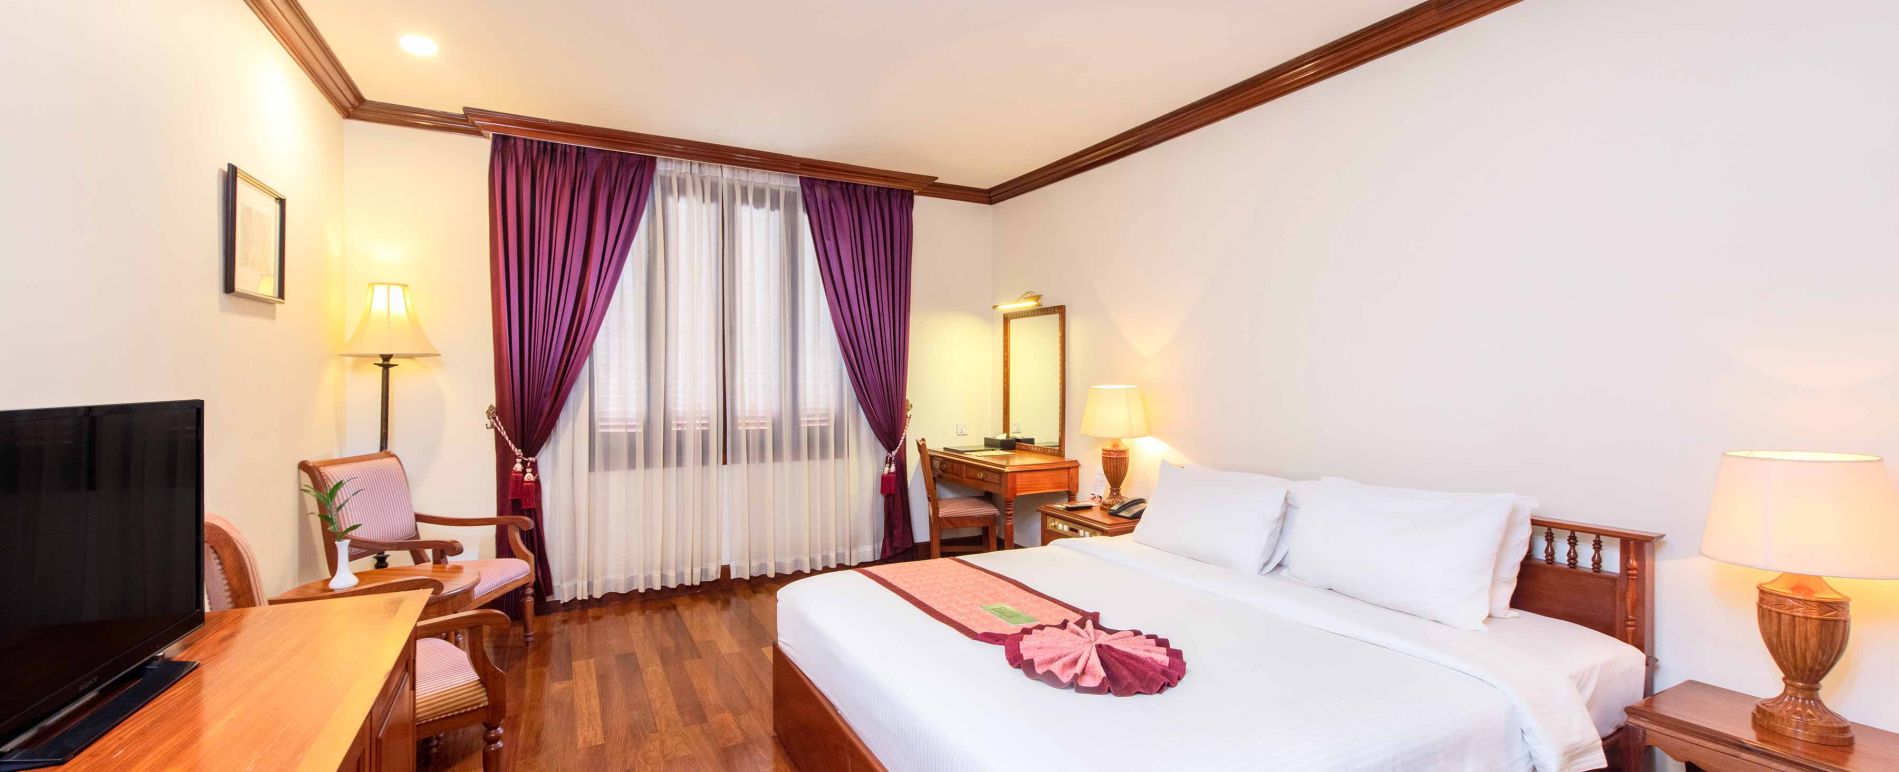 Welcome to Steung Siem Reap Hotel, Siem Reap - Official Site